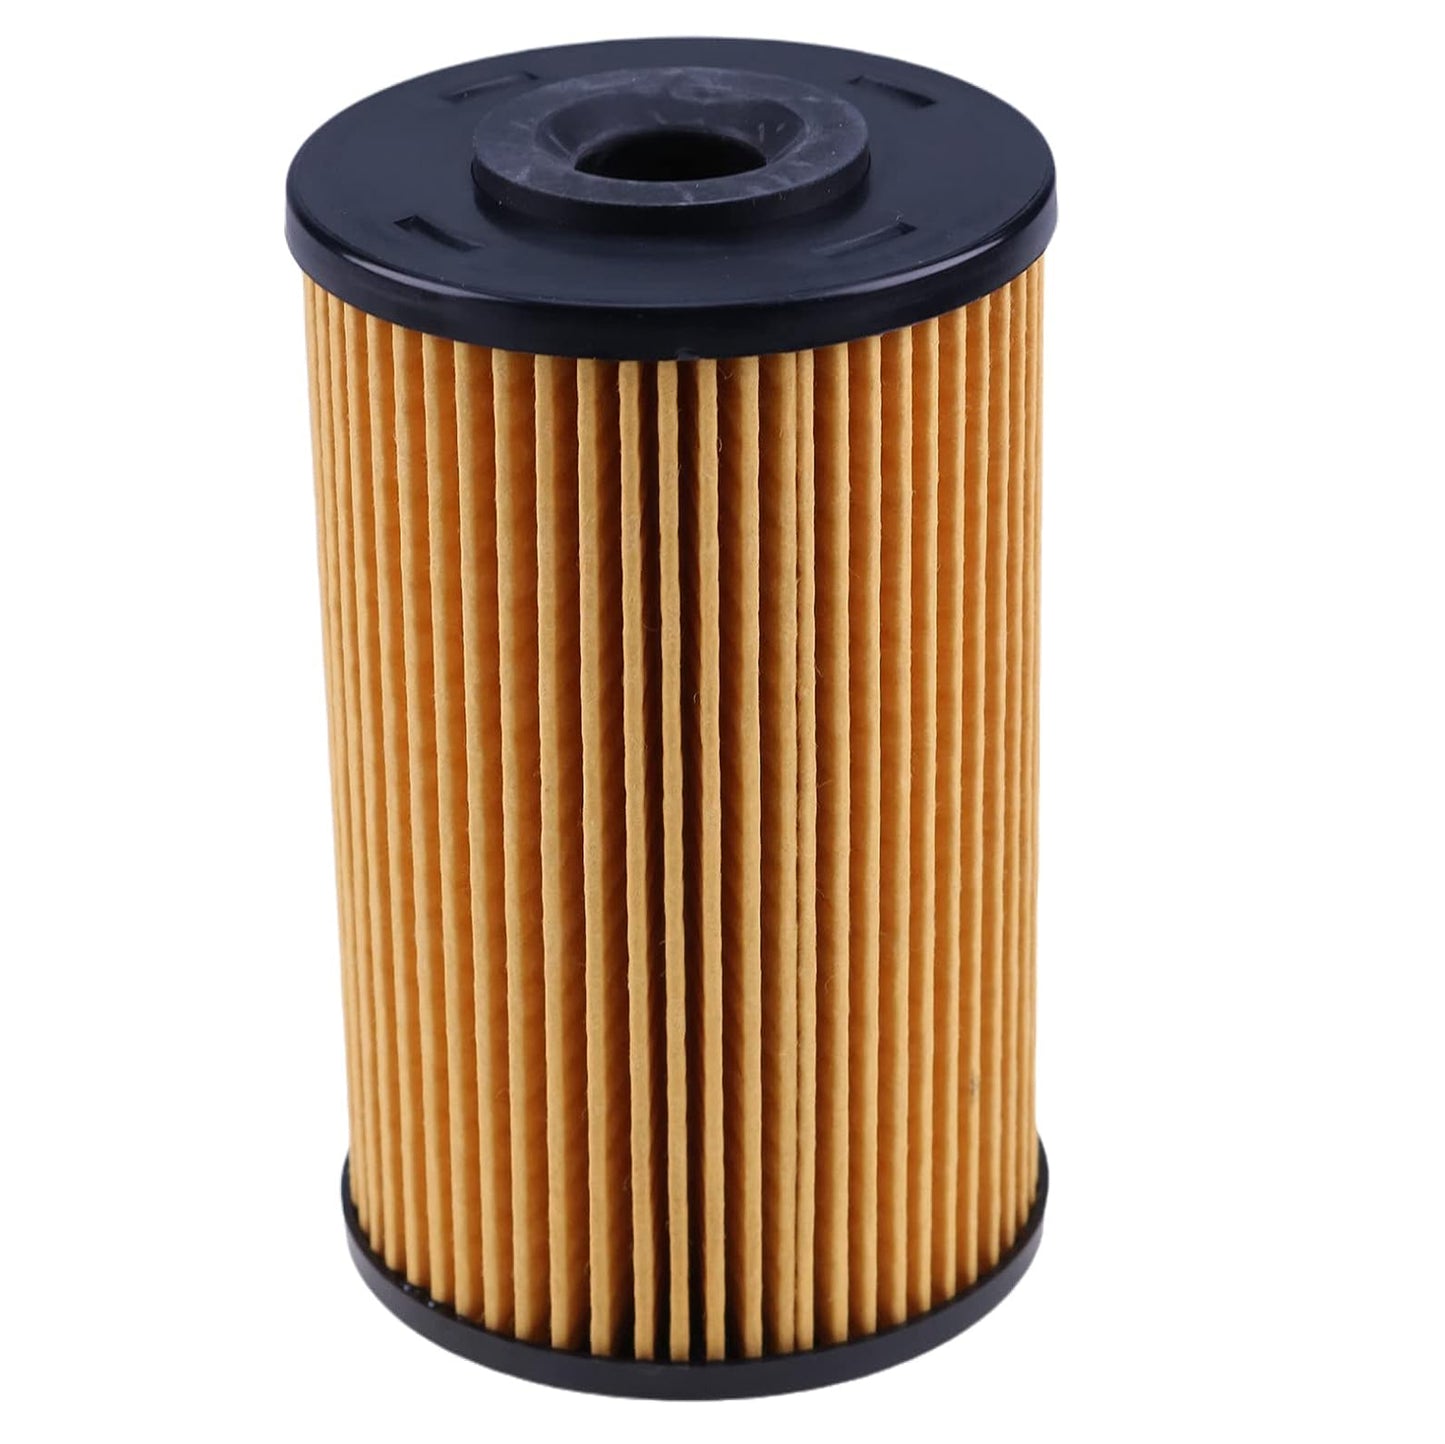 8-98147-525-0 Fuel Filter Compatible With ISUZU NPR NQR AND NPR-HD 2011-2021